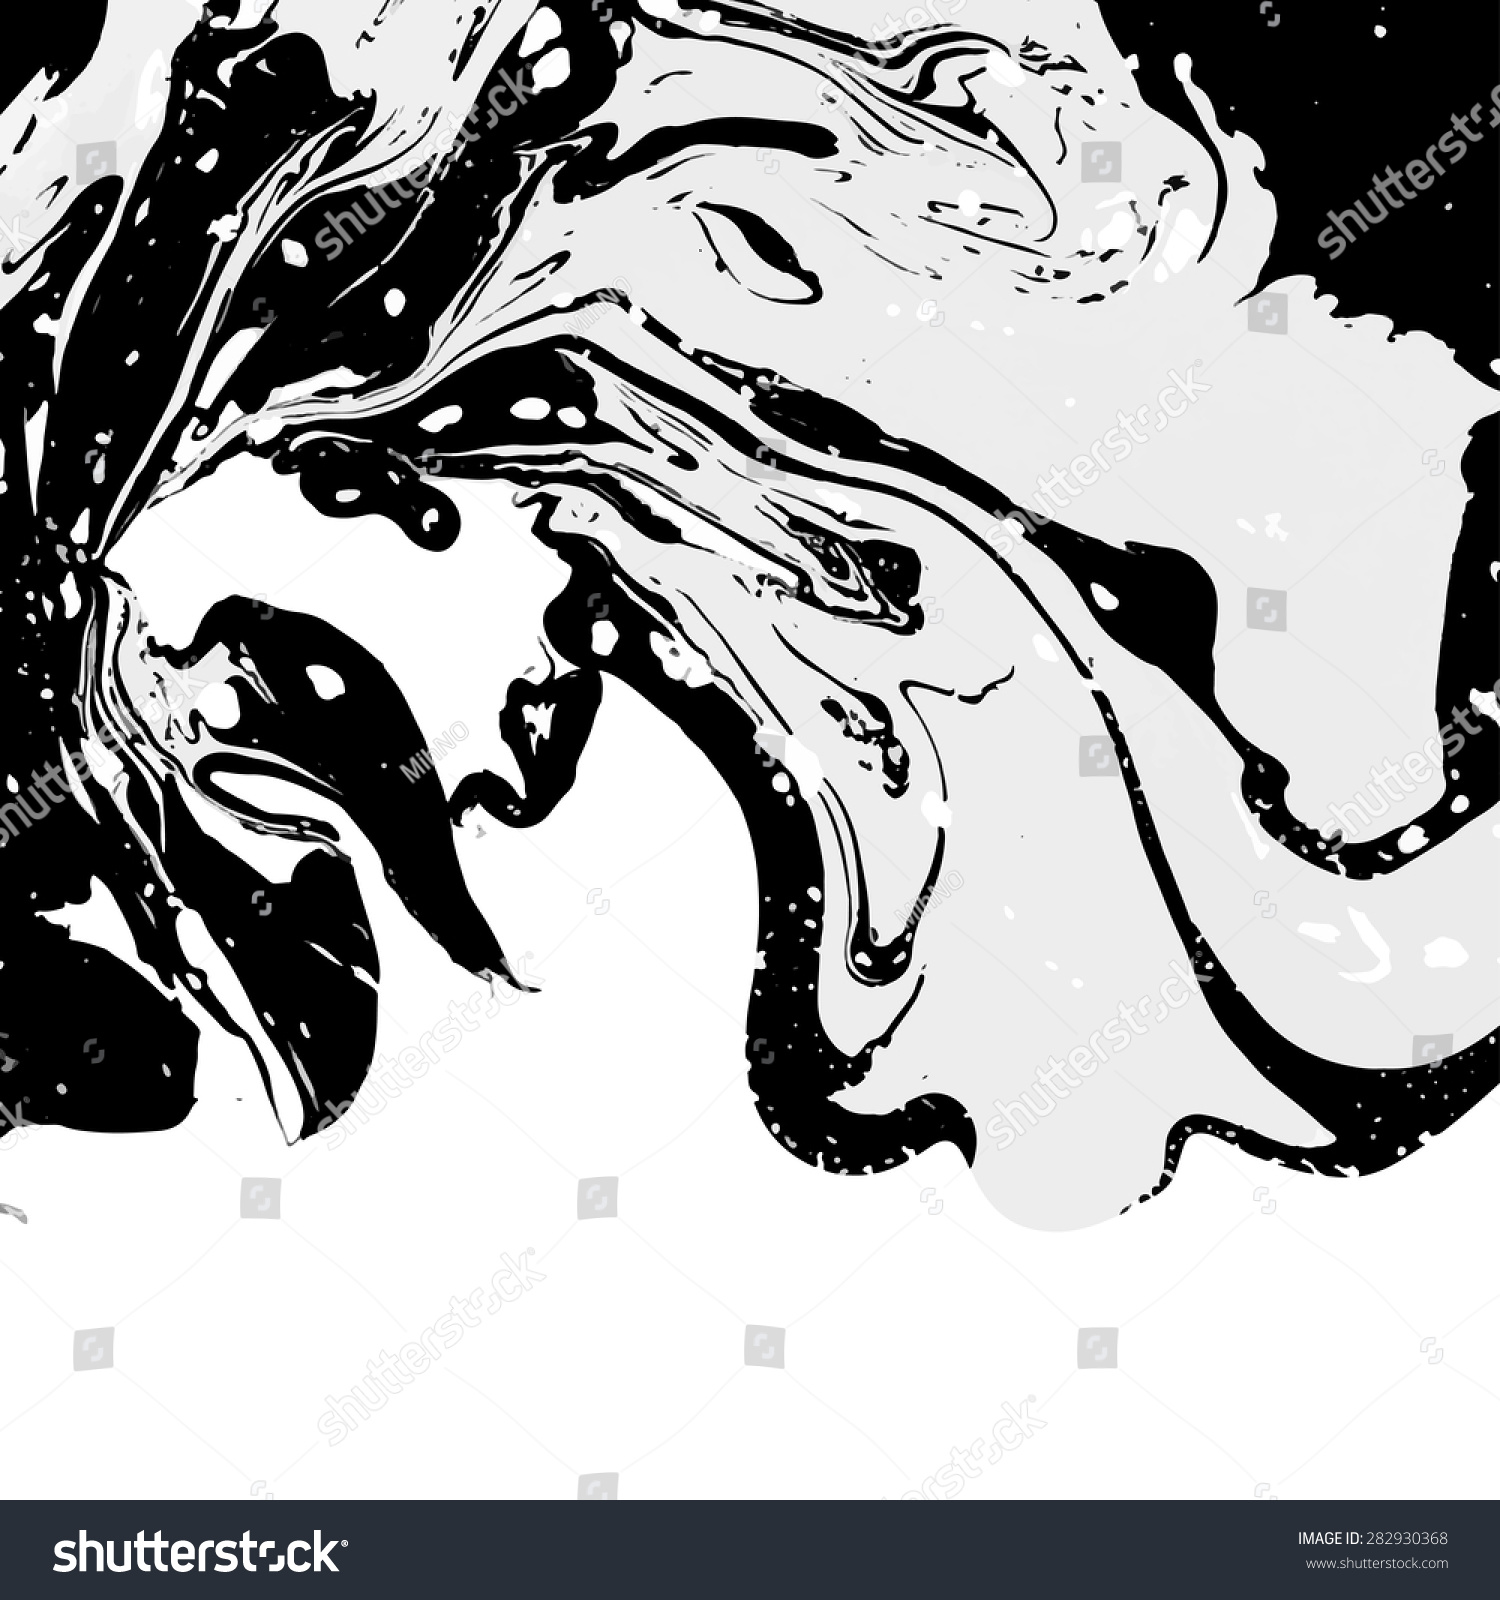 Marble clipart black and white 7 » Clipart Station.